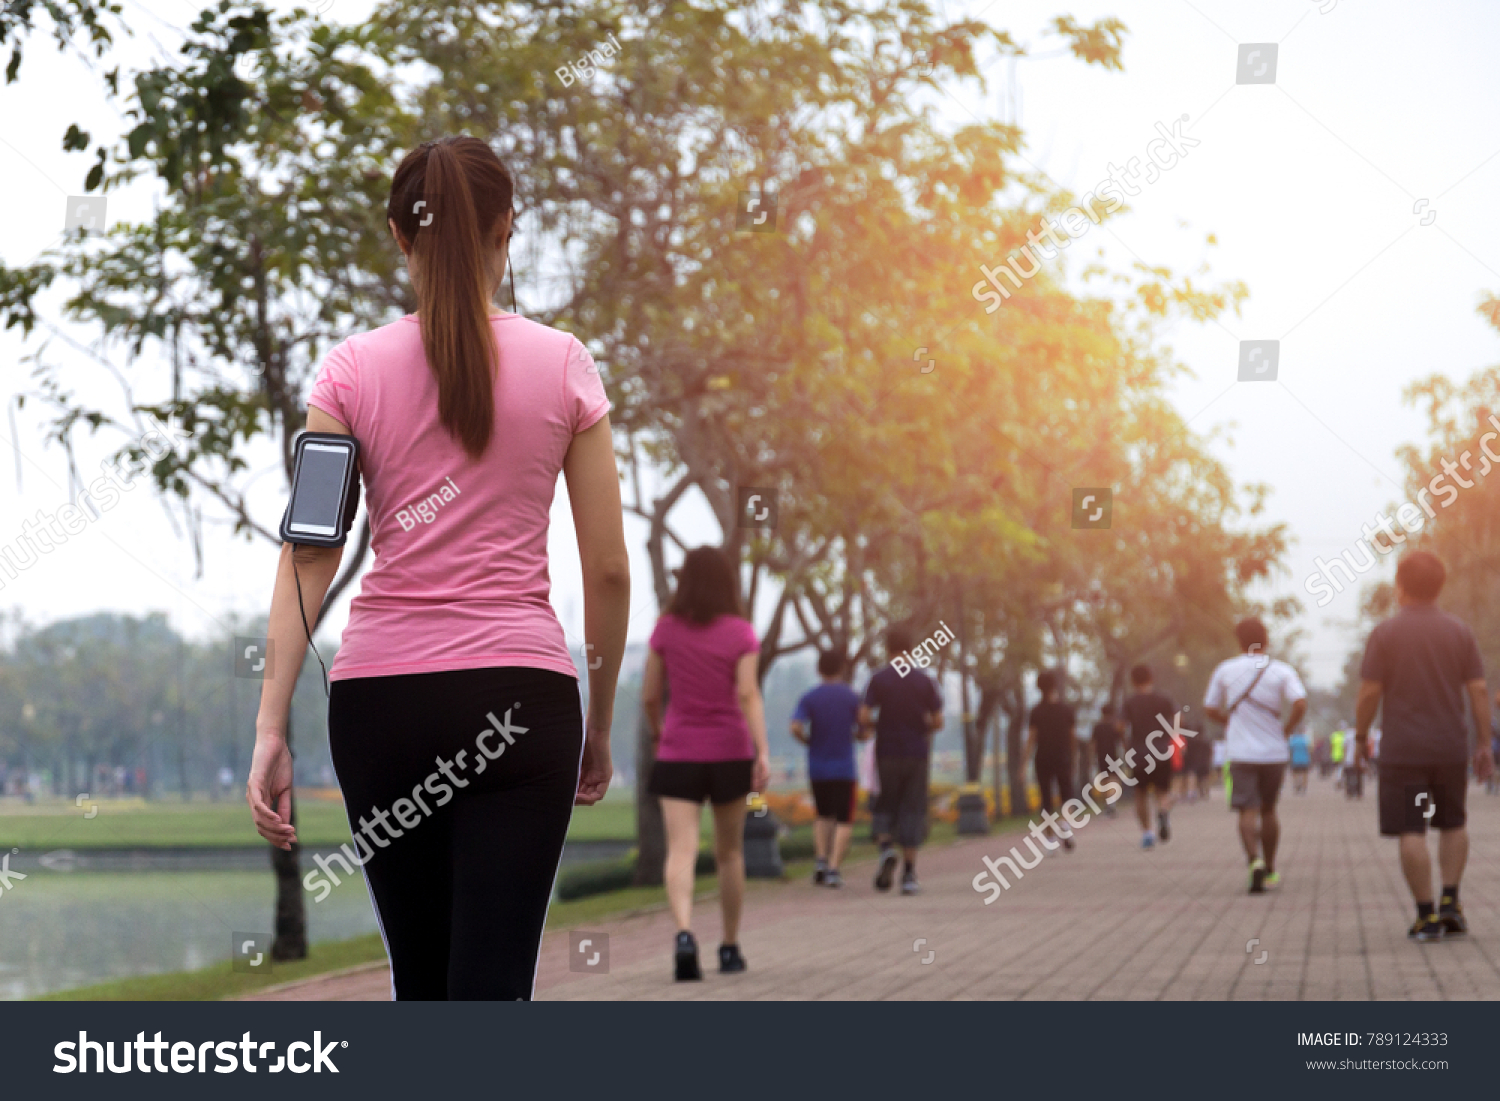 Group of people exercise walking in the park in morning #789124333